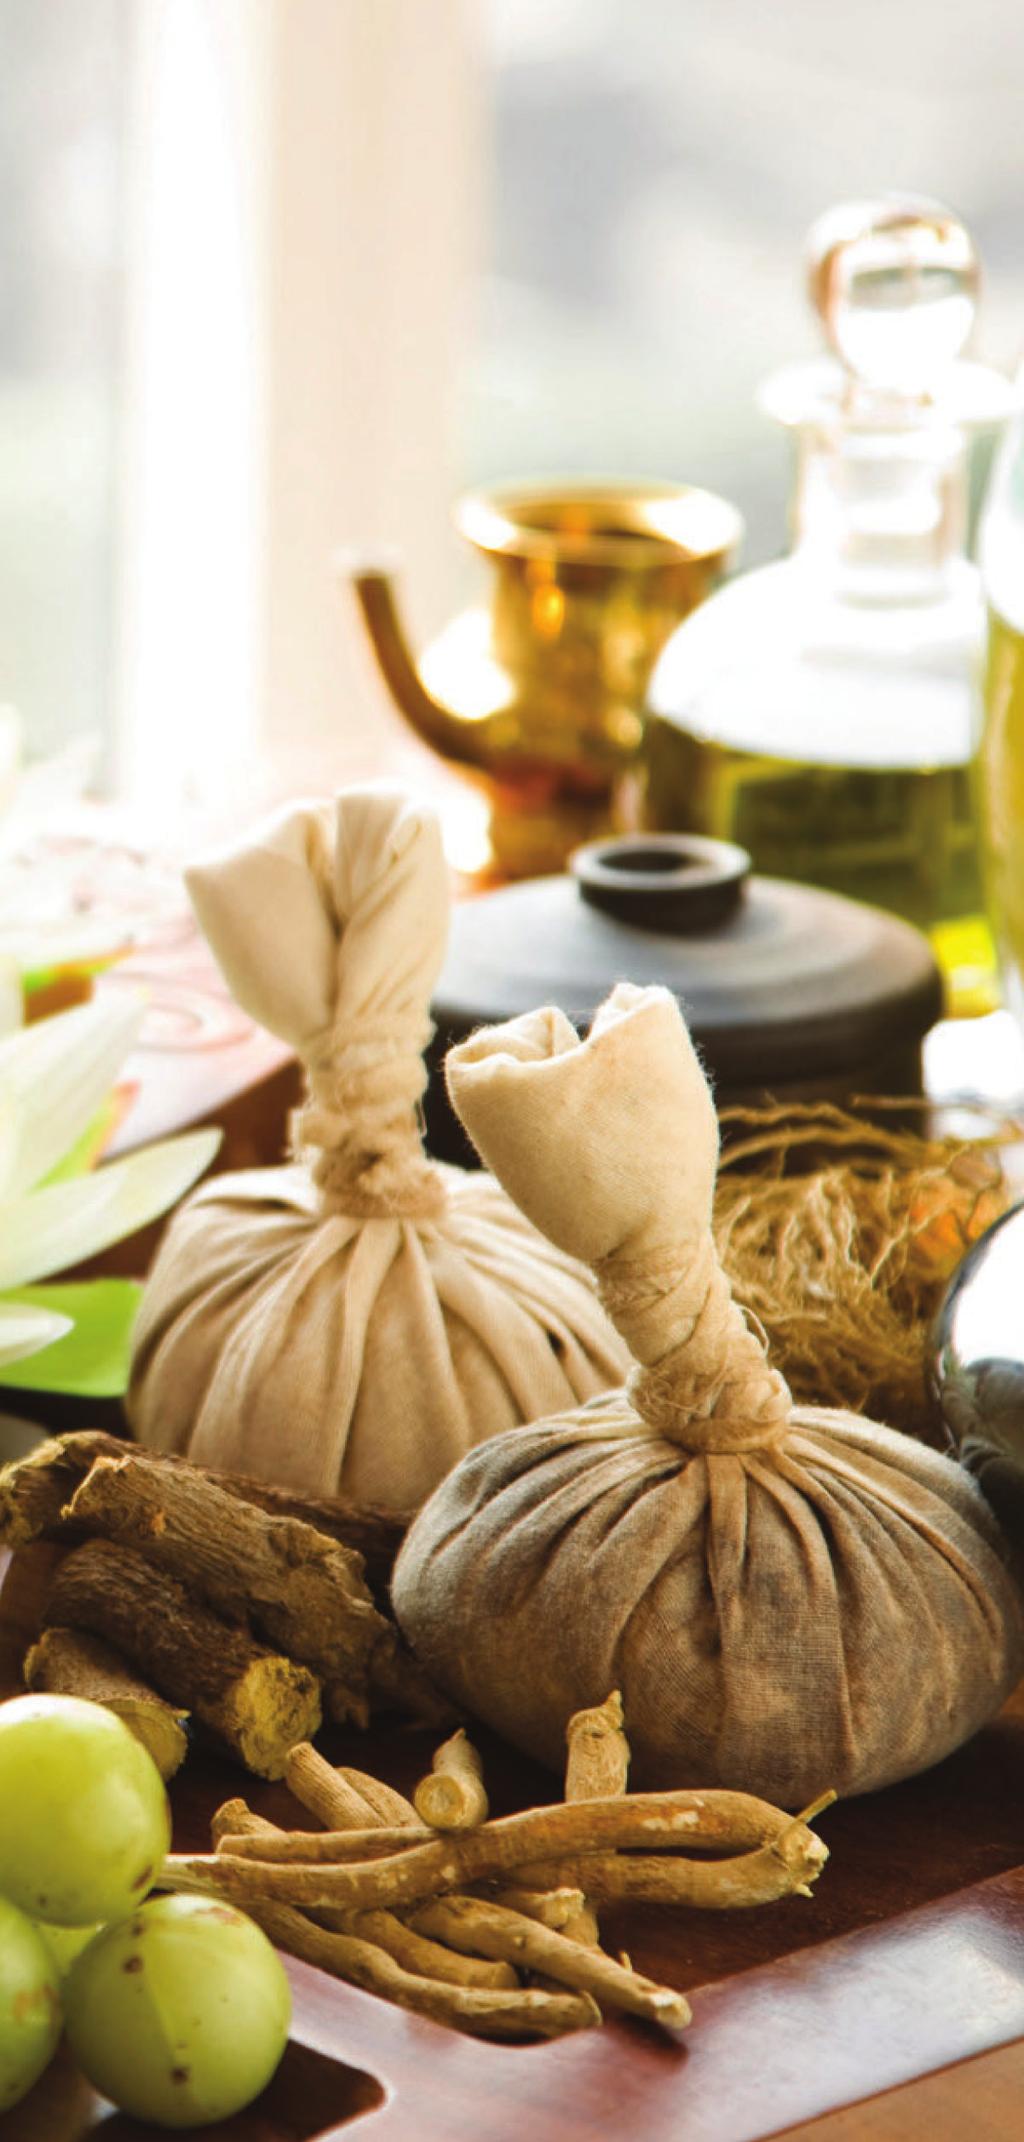 AYURVEDA - BODY TREATMENTS ELAKKIZHI 75 MIN AED 452 One of the most relaxing and refreshing treatment that you can enjoy.